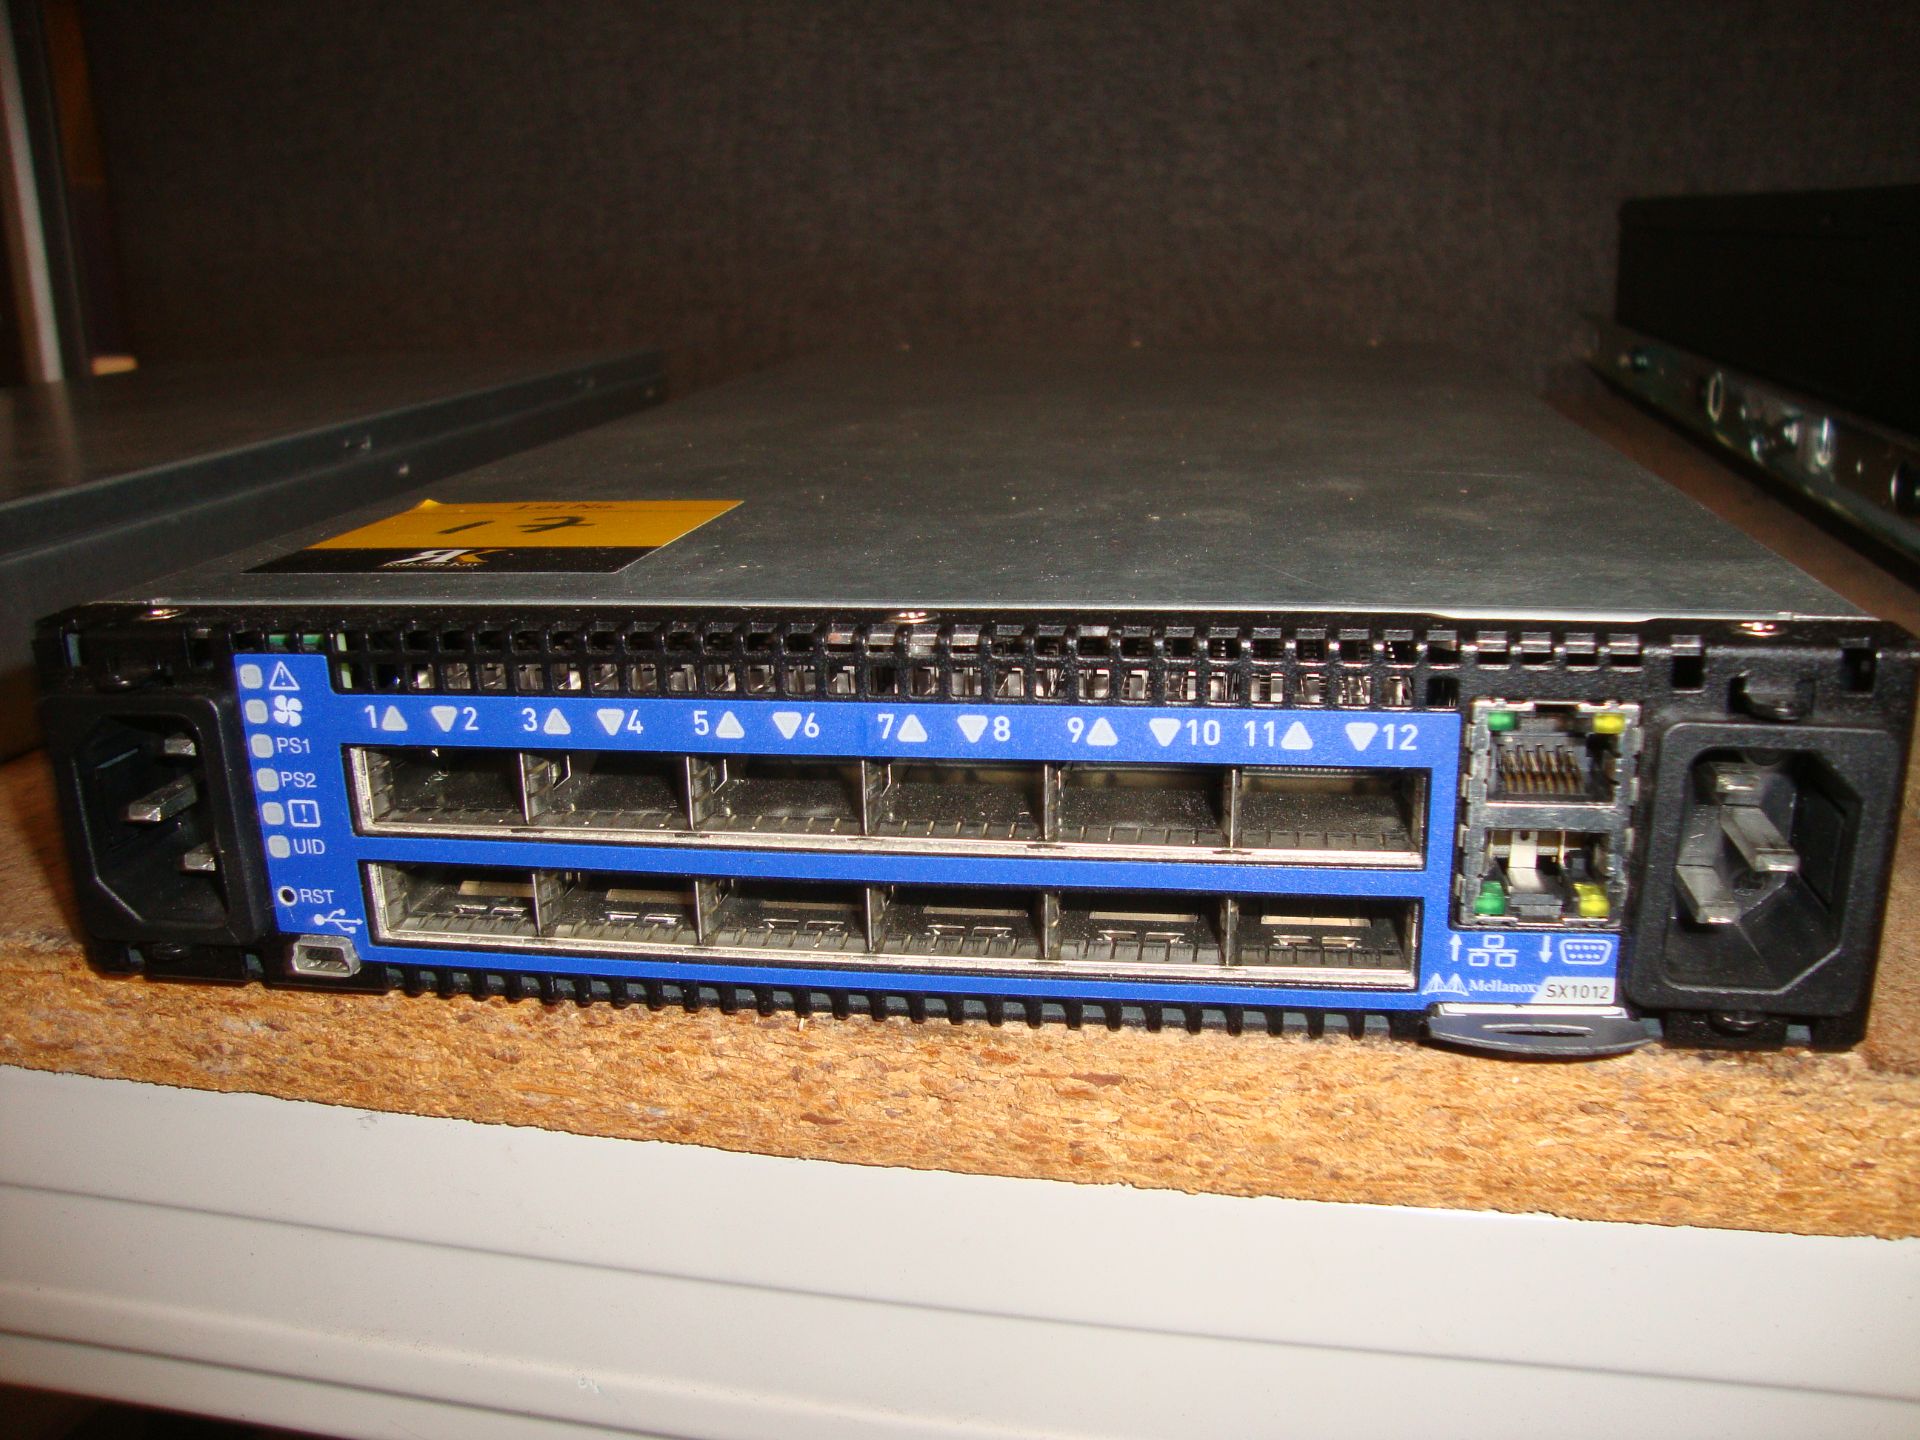 Mellanox model SX1012 switch with dual PSUs and 12xQSFP 40/56Gb ports, serial no. MT1522K02407. This - Image 4 of 5